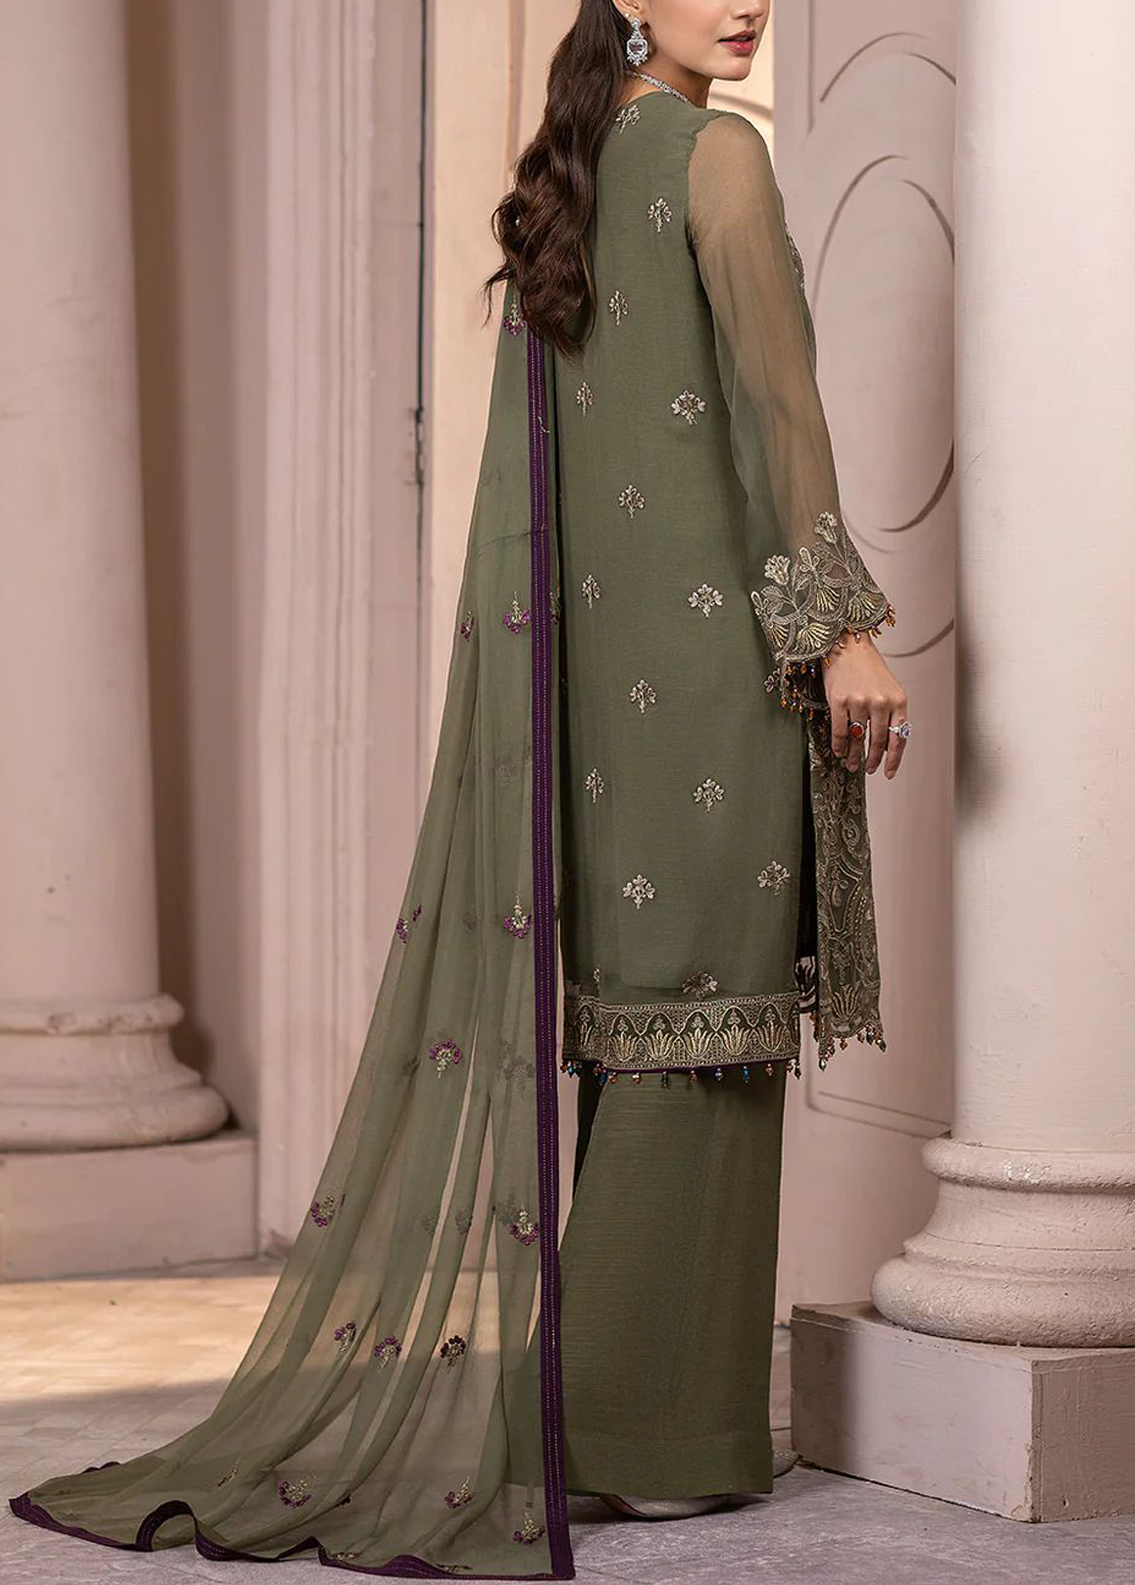 unstitched flossie Embroidered Chiffon dress with Malai Trouser